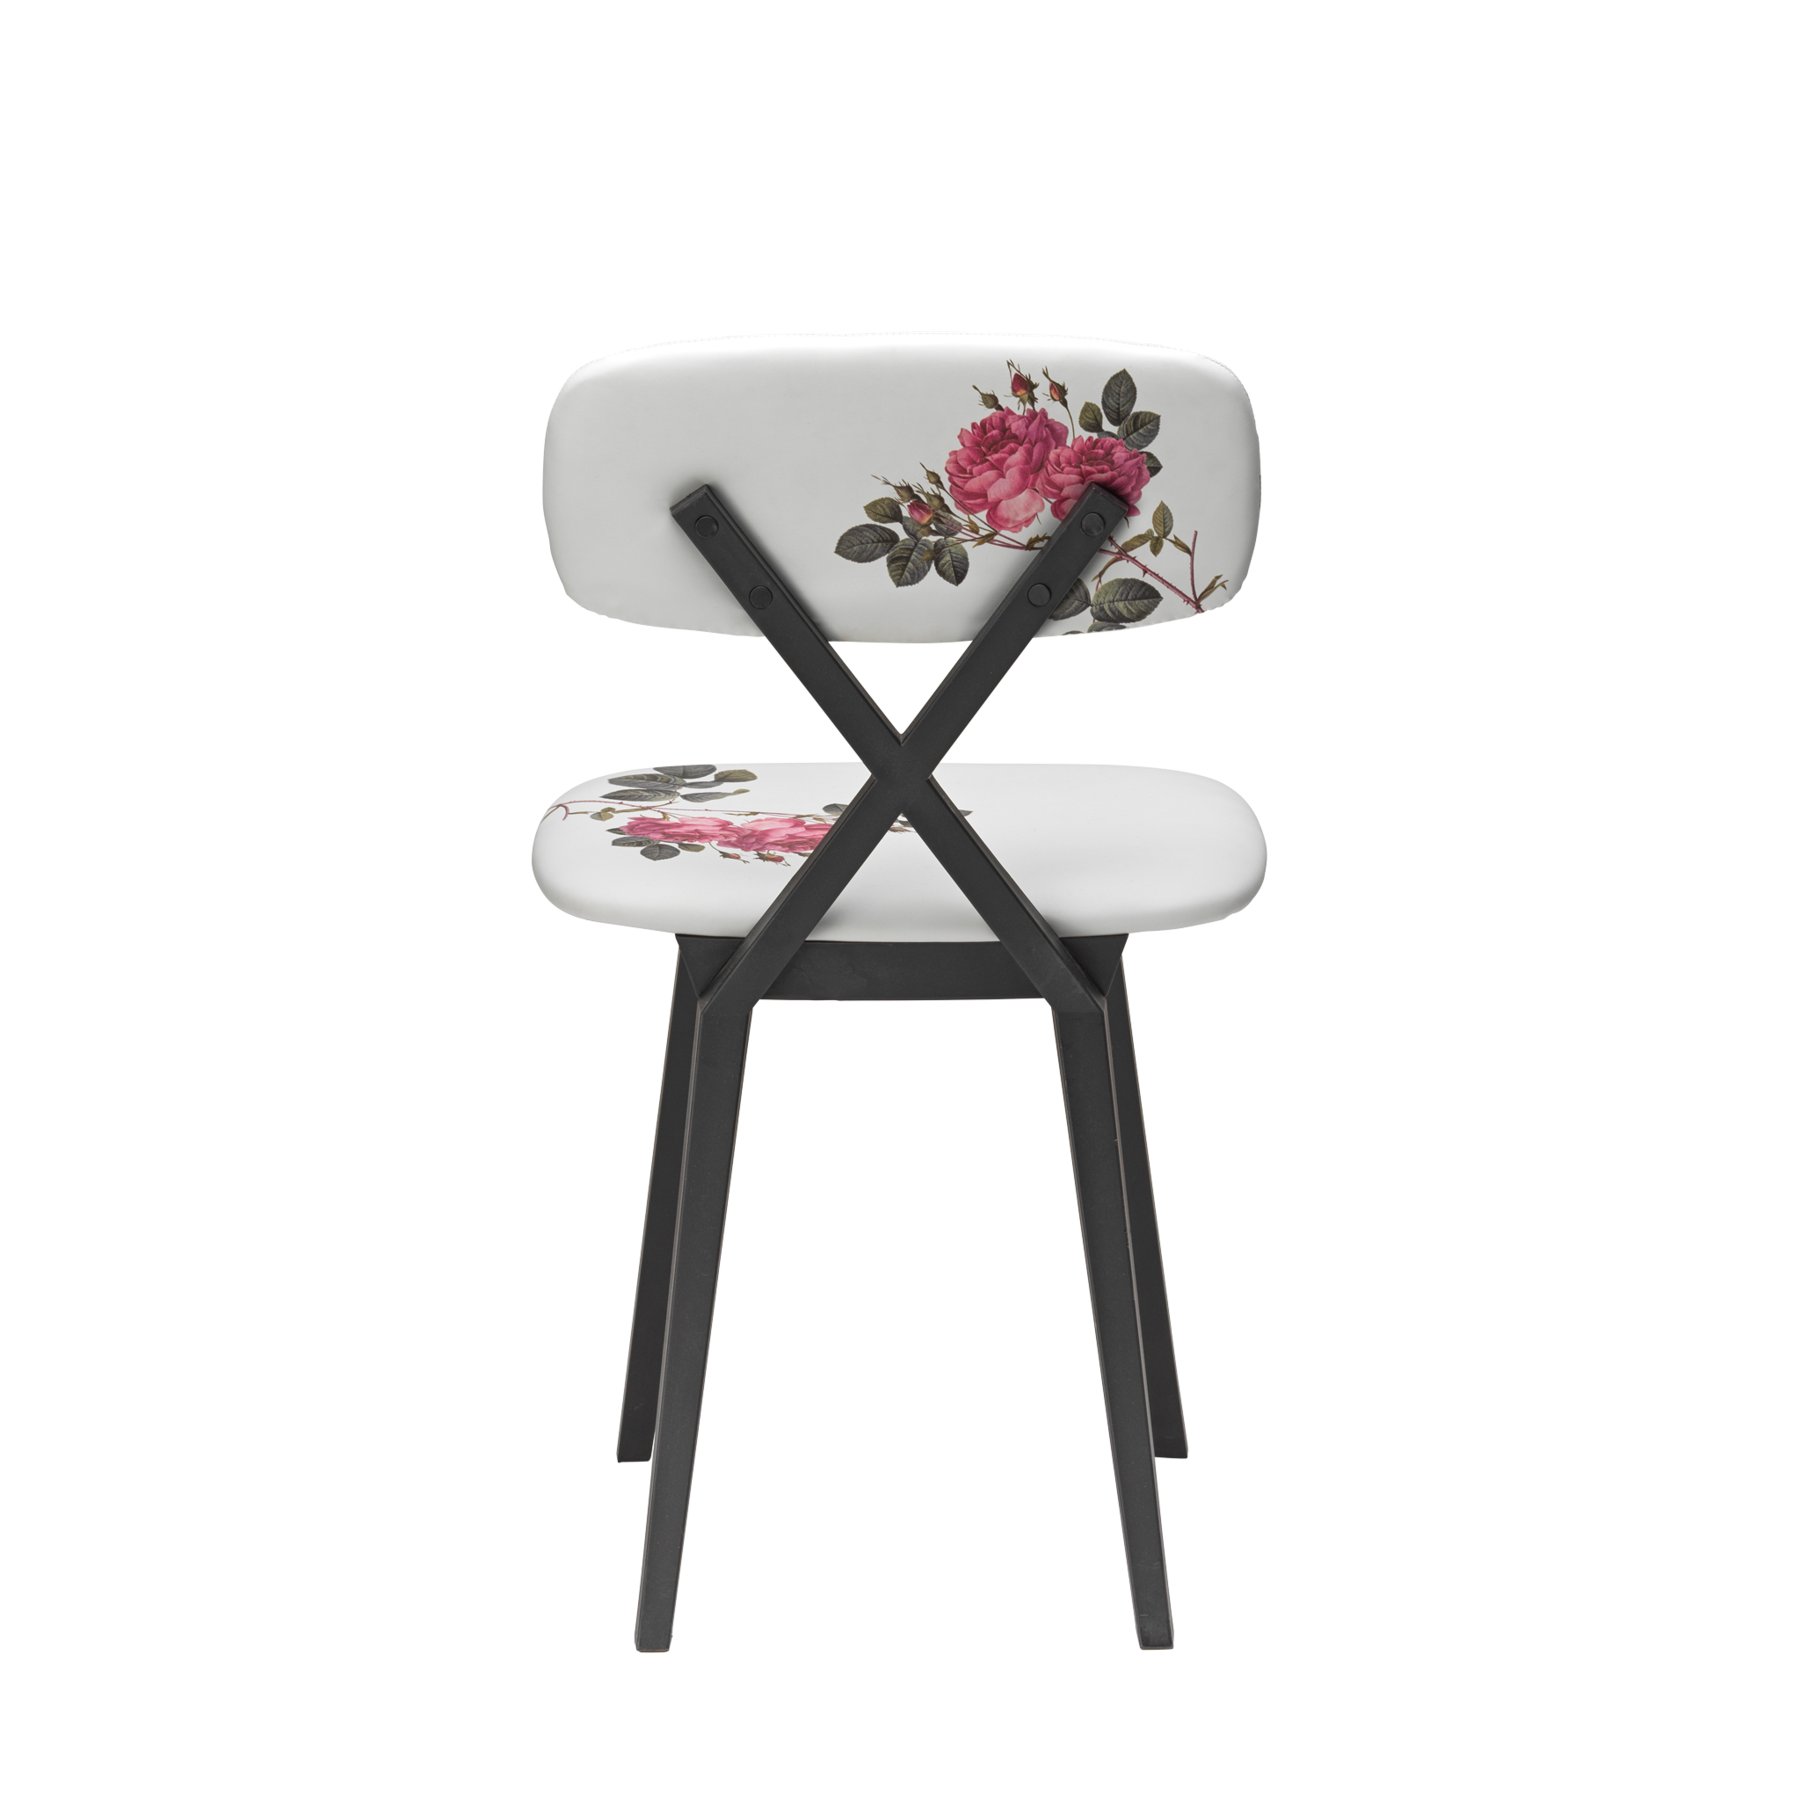 X chair with floral motif - 2 pieces